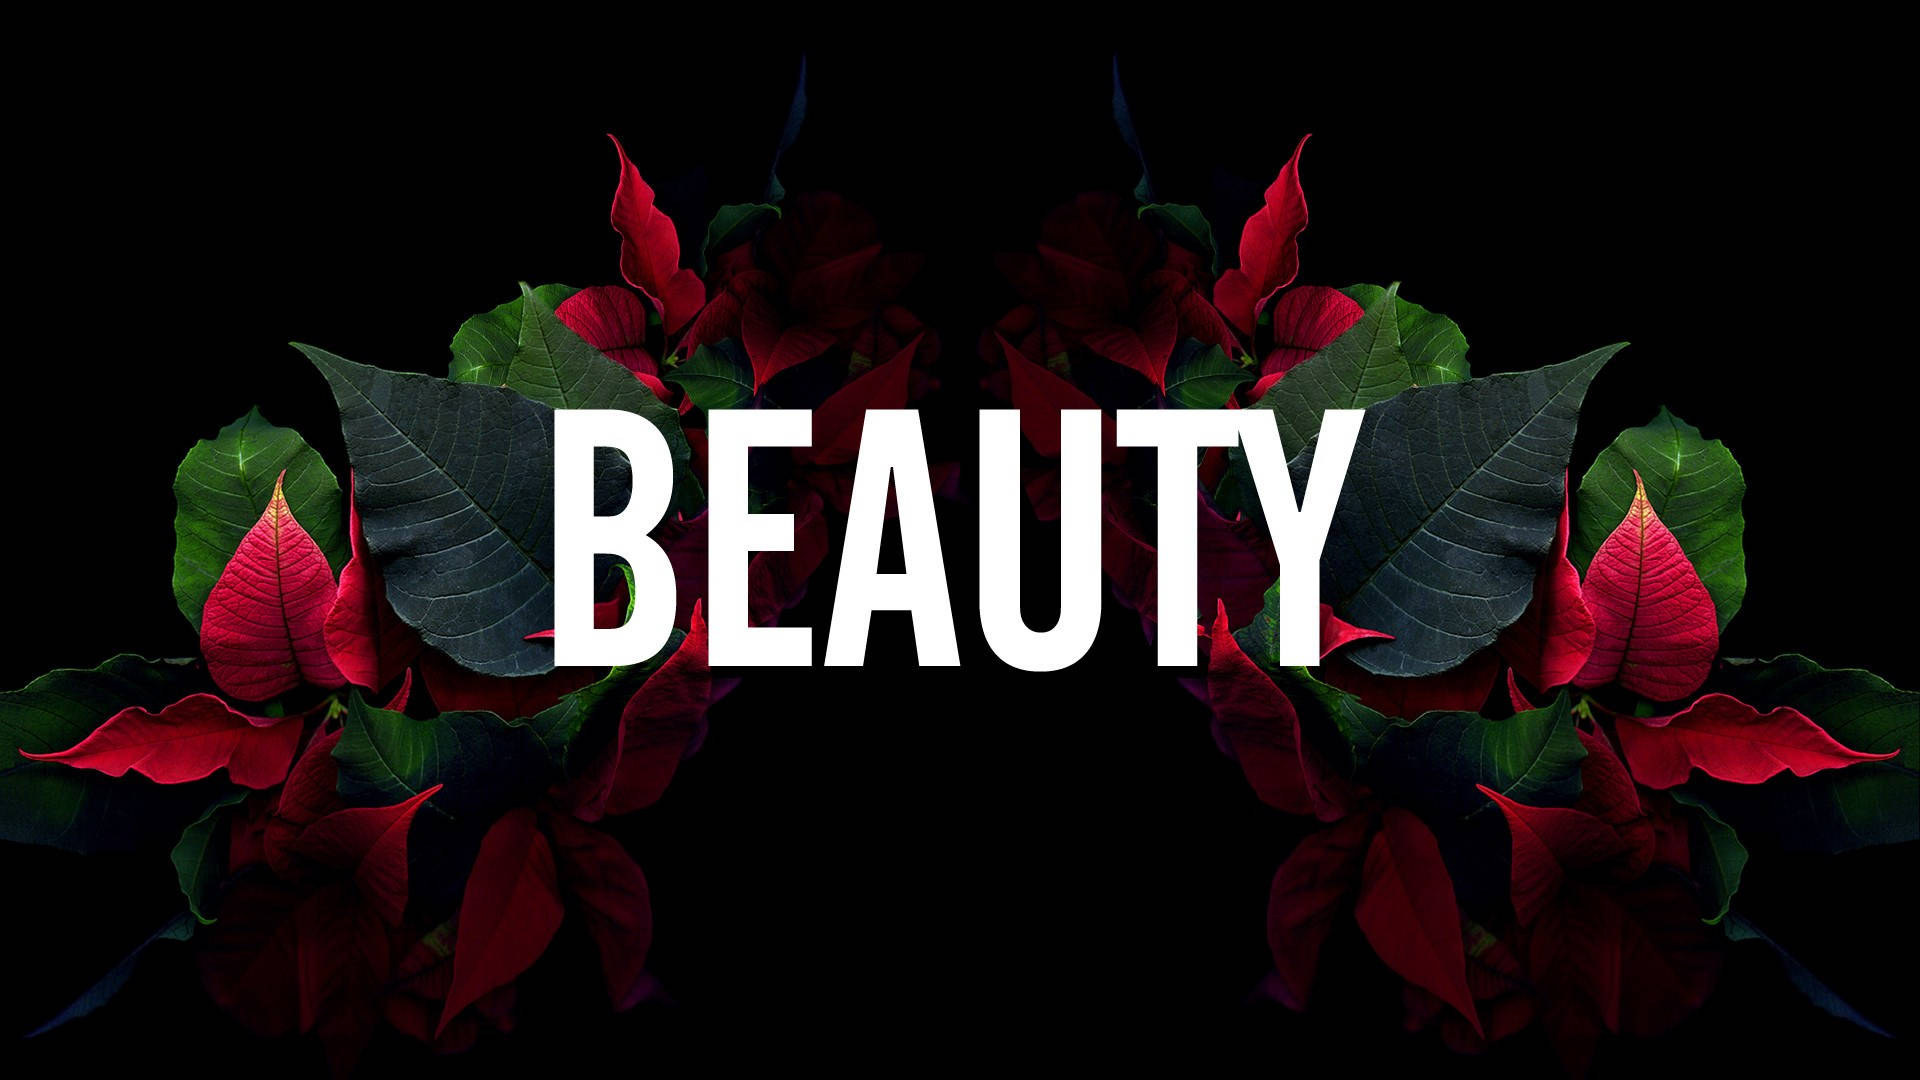 Beauty - A Black Background With Red Flowers Wallpaper